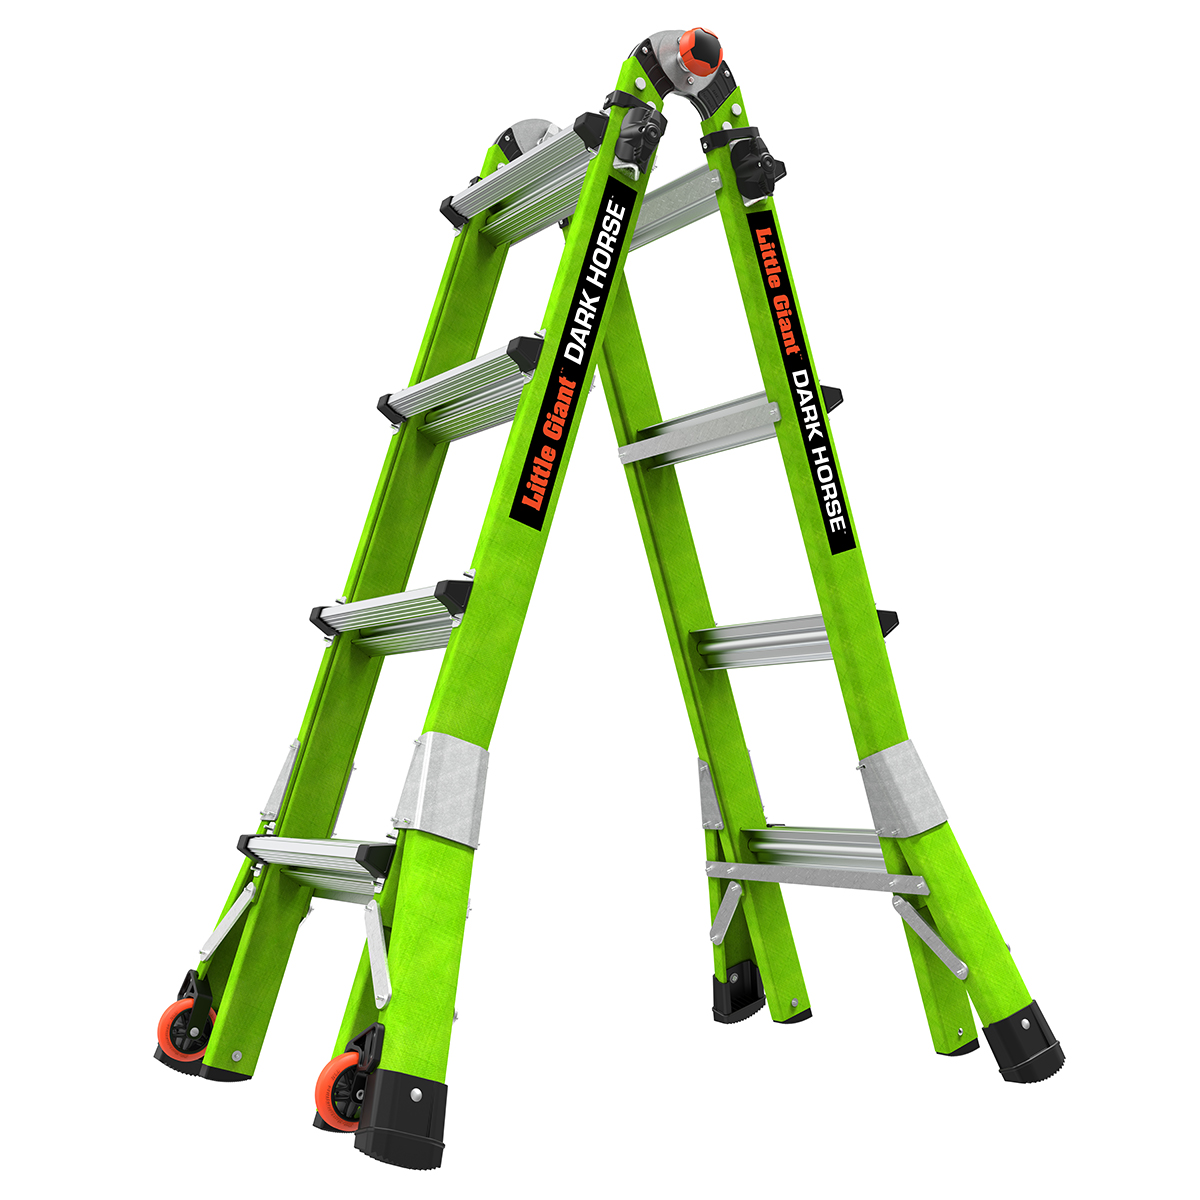 Little Giant Ladders Dark Horse 2.0 Model 17 Type 1A Ladder from Columbia Safety